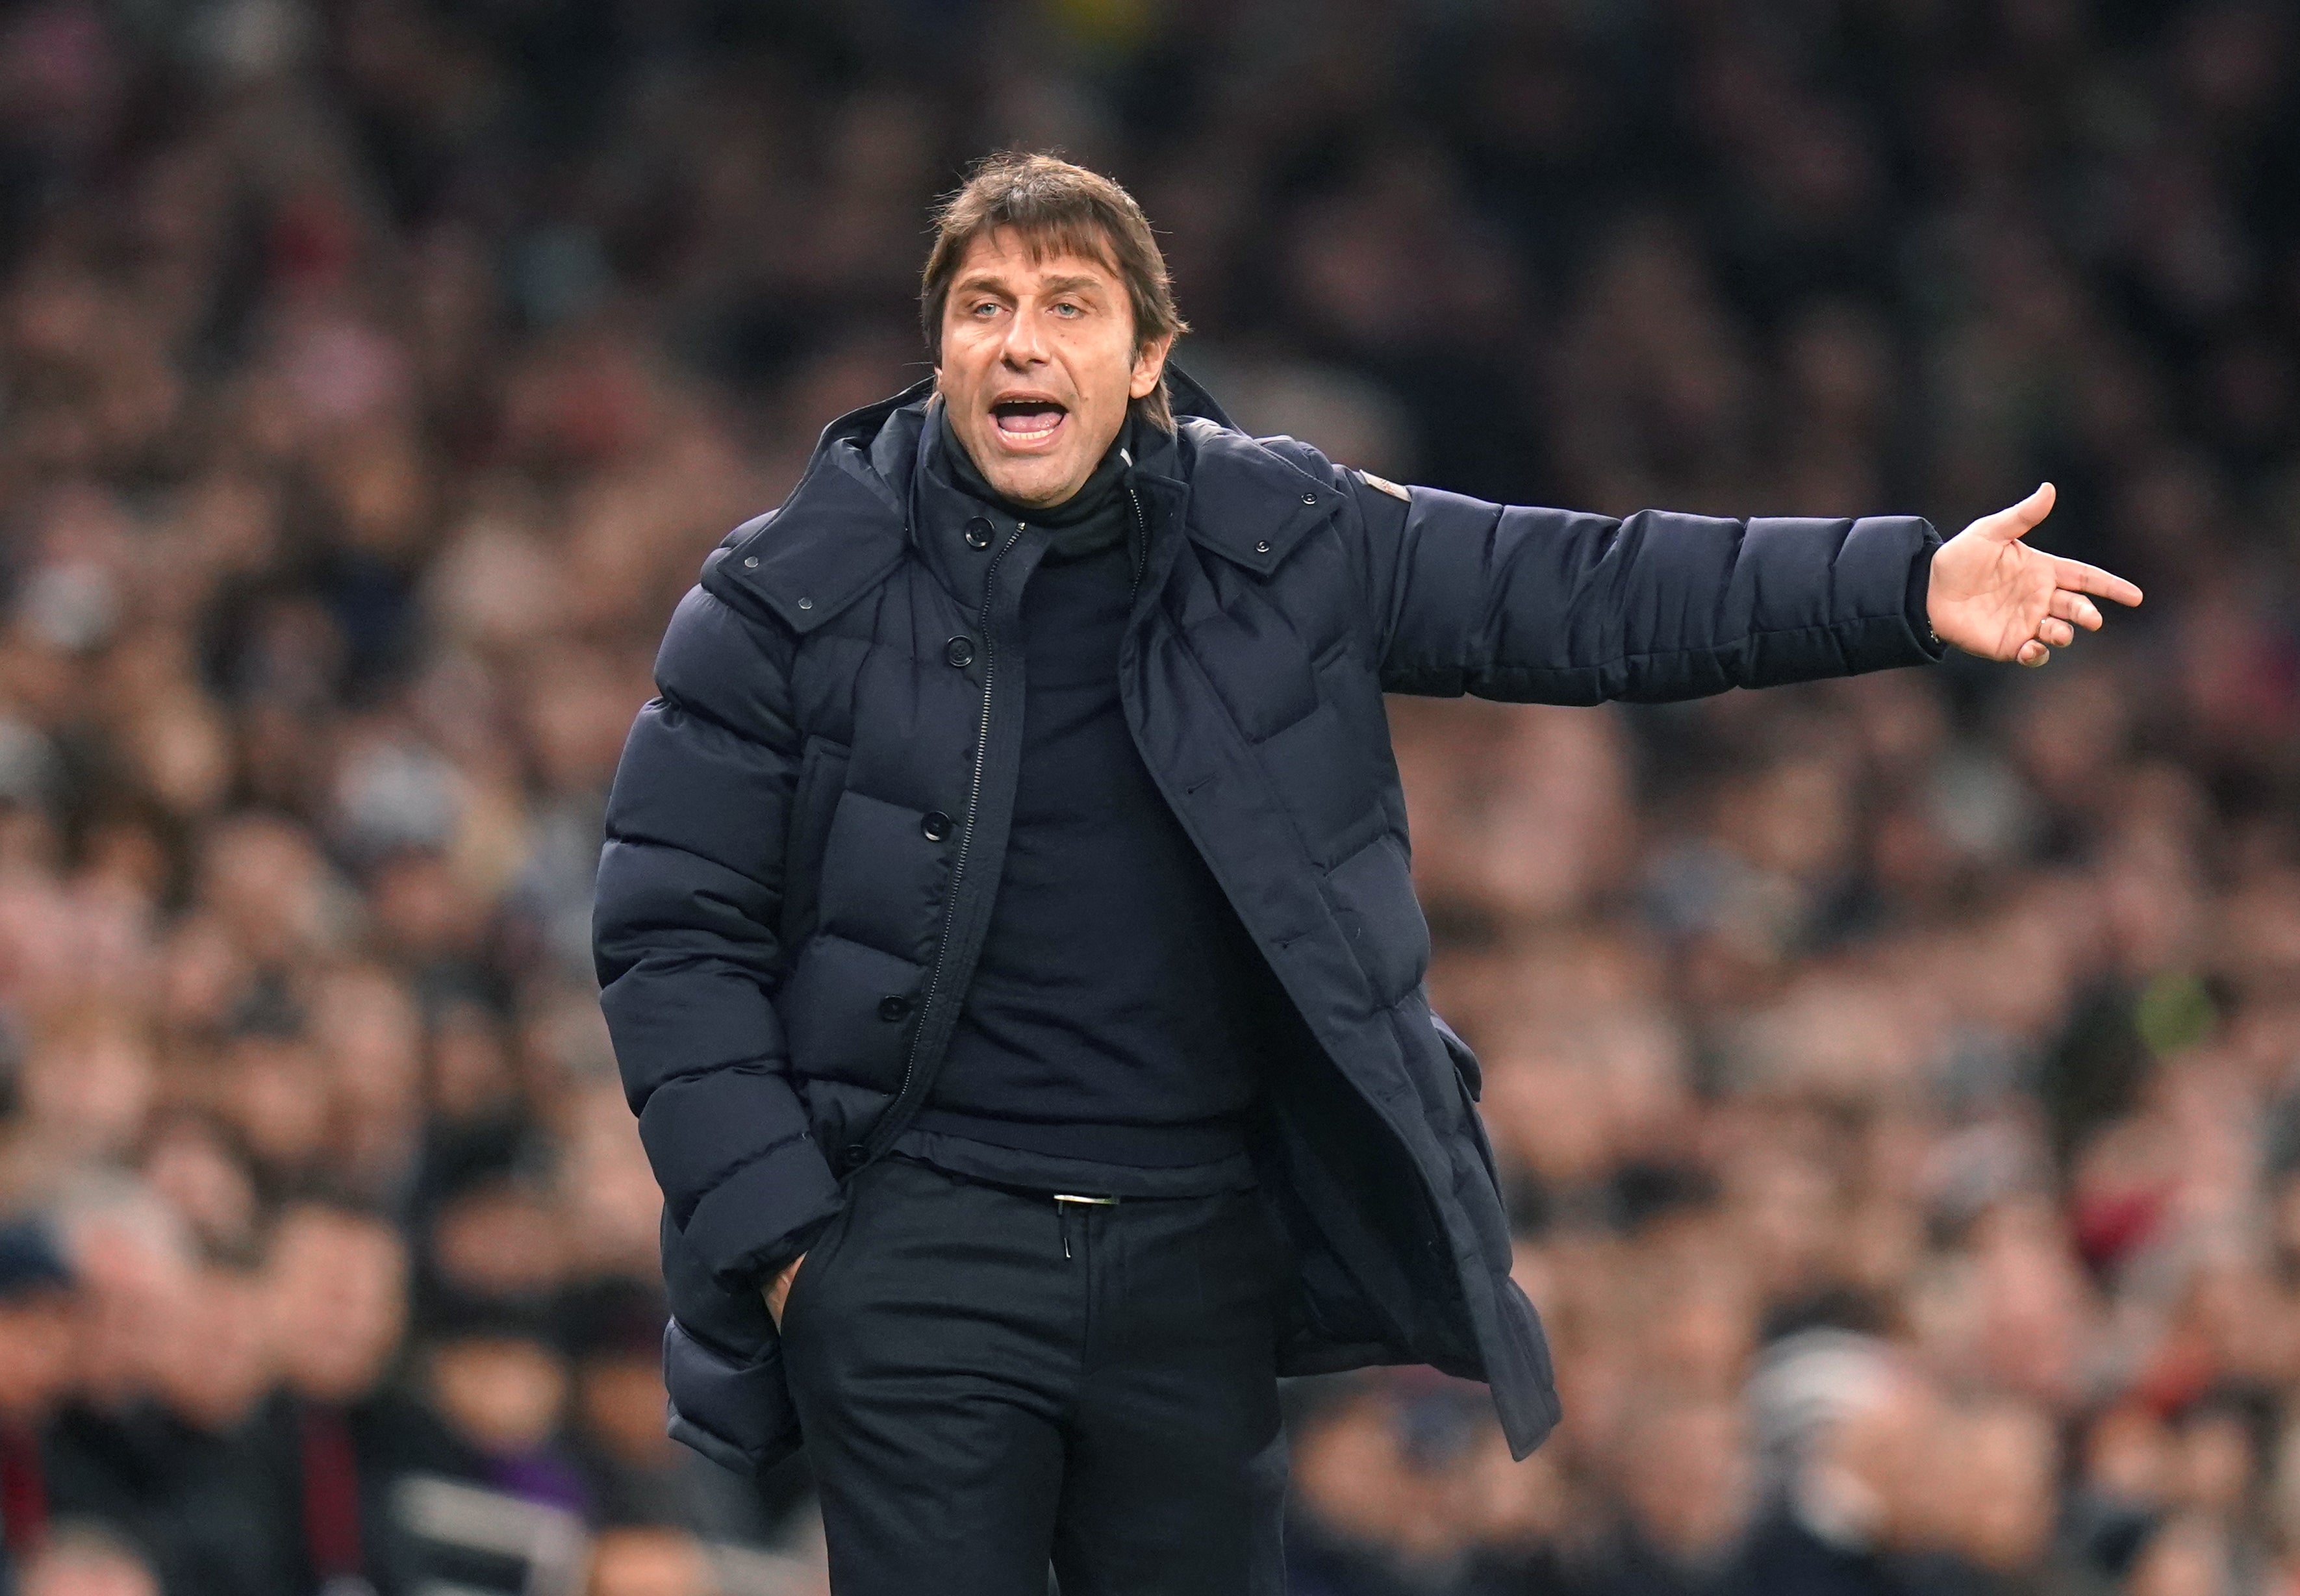 Antonio Conte “lives” for the stress of management (Adam Davy/PA)